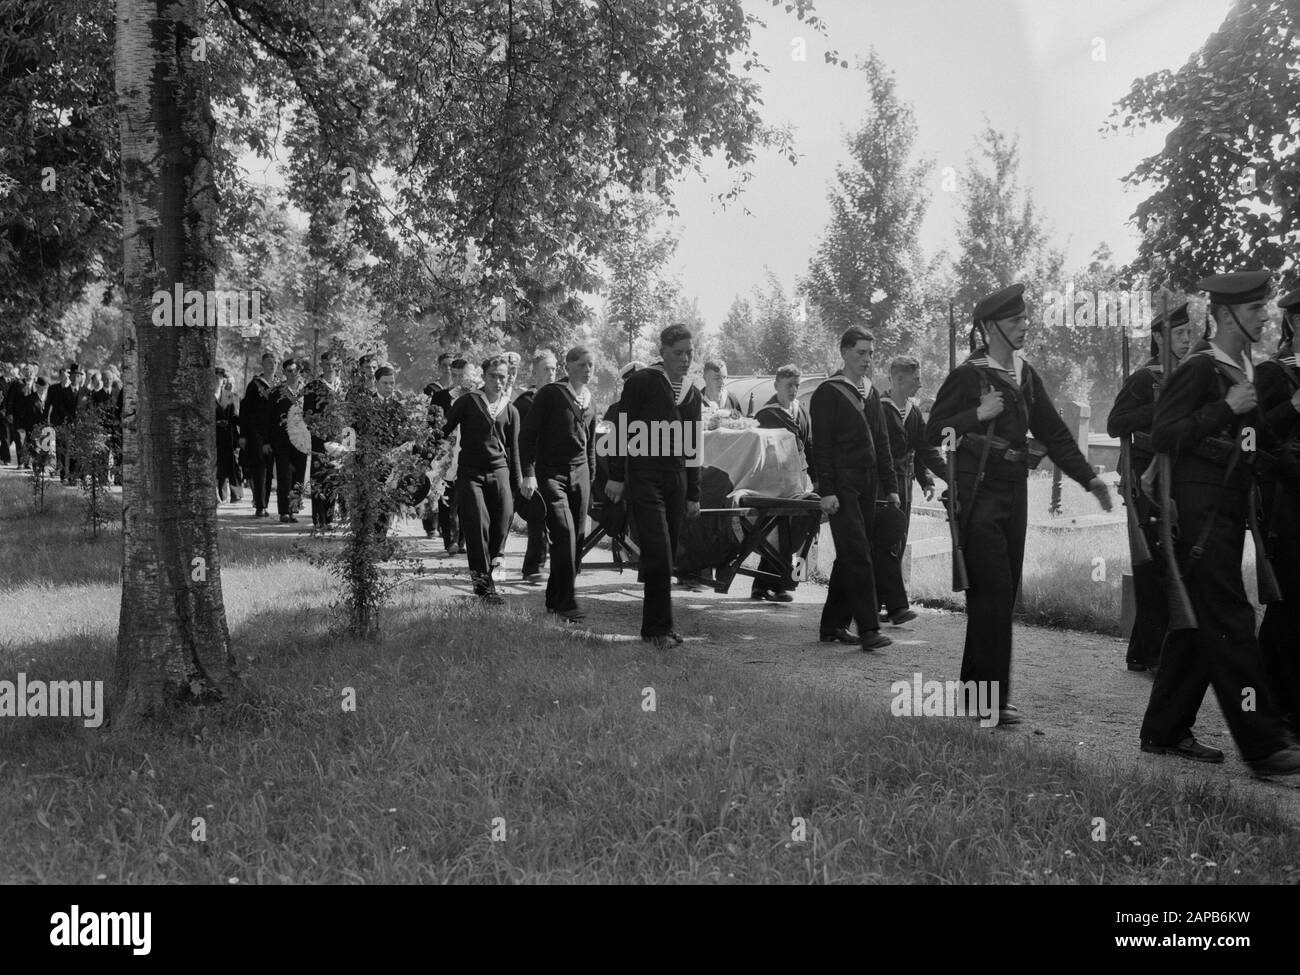 Funeral at Dordrecht sergeant aircraft telegraphist Bolleurs. At the cemetery Date: 26 July 1948 Location: Dordrecht Keywords: Cemetery, Burial, Sergeants Stock Photo